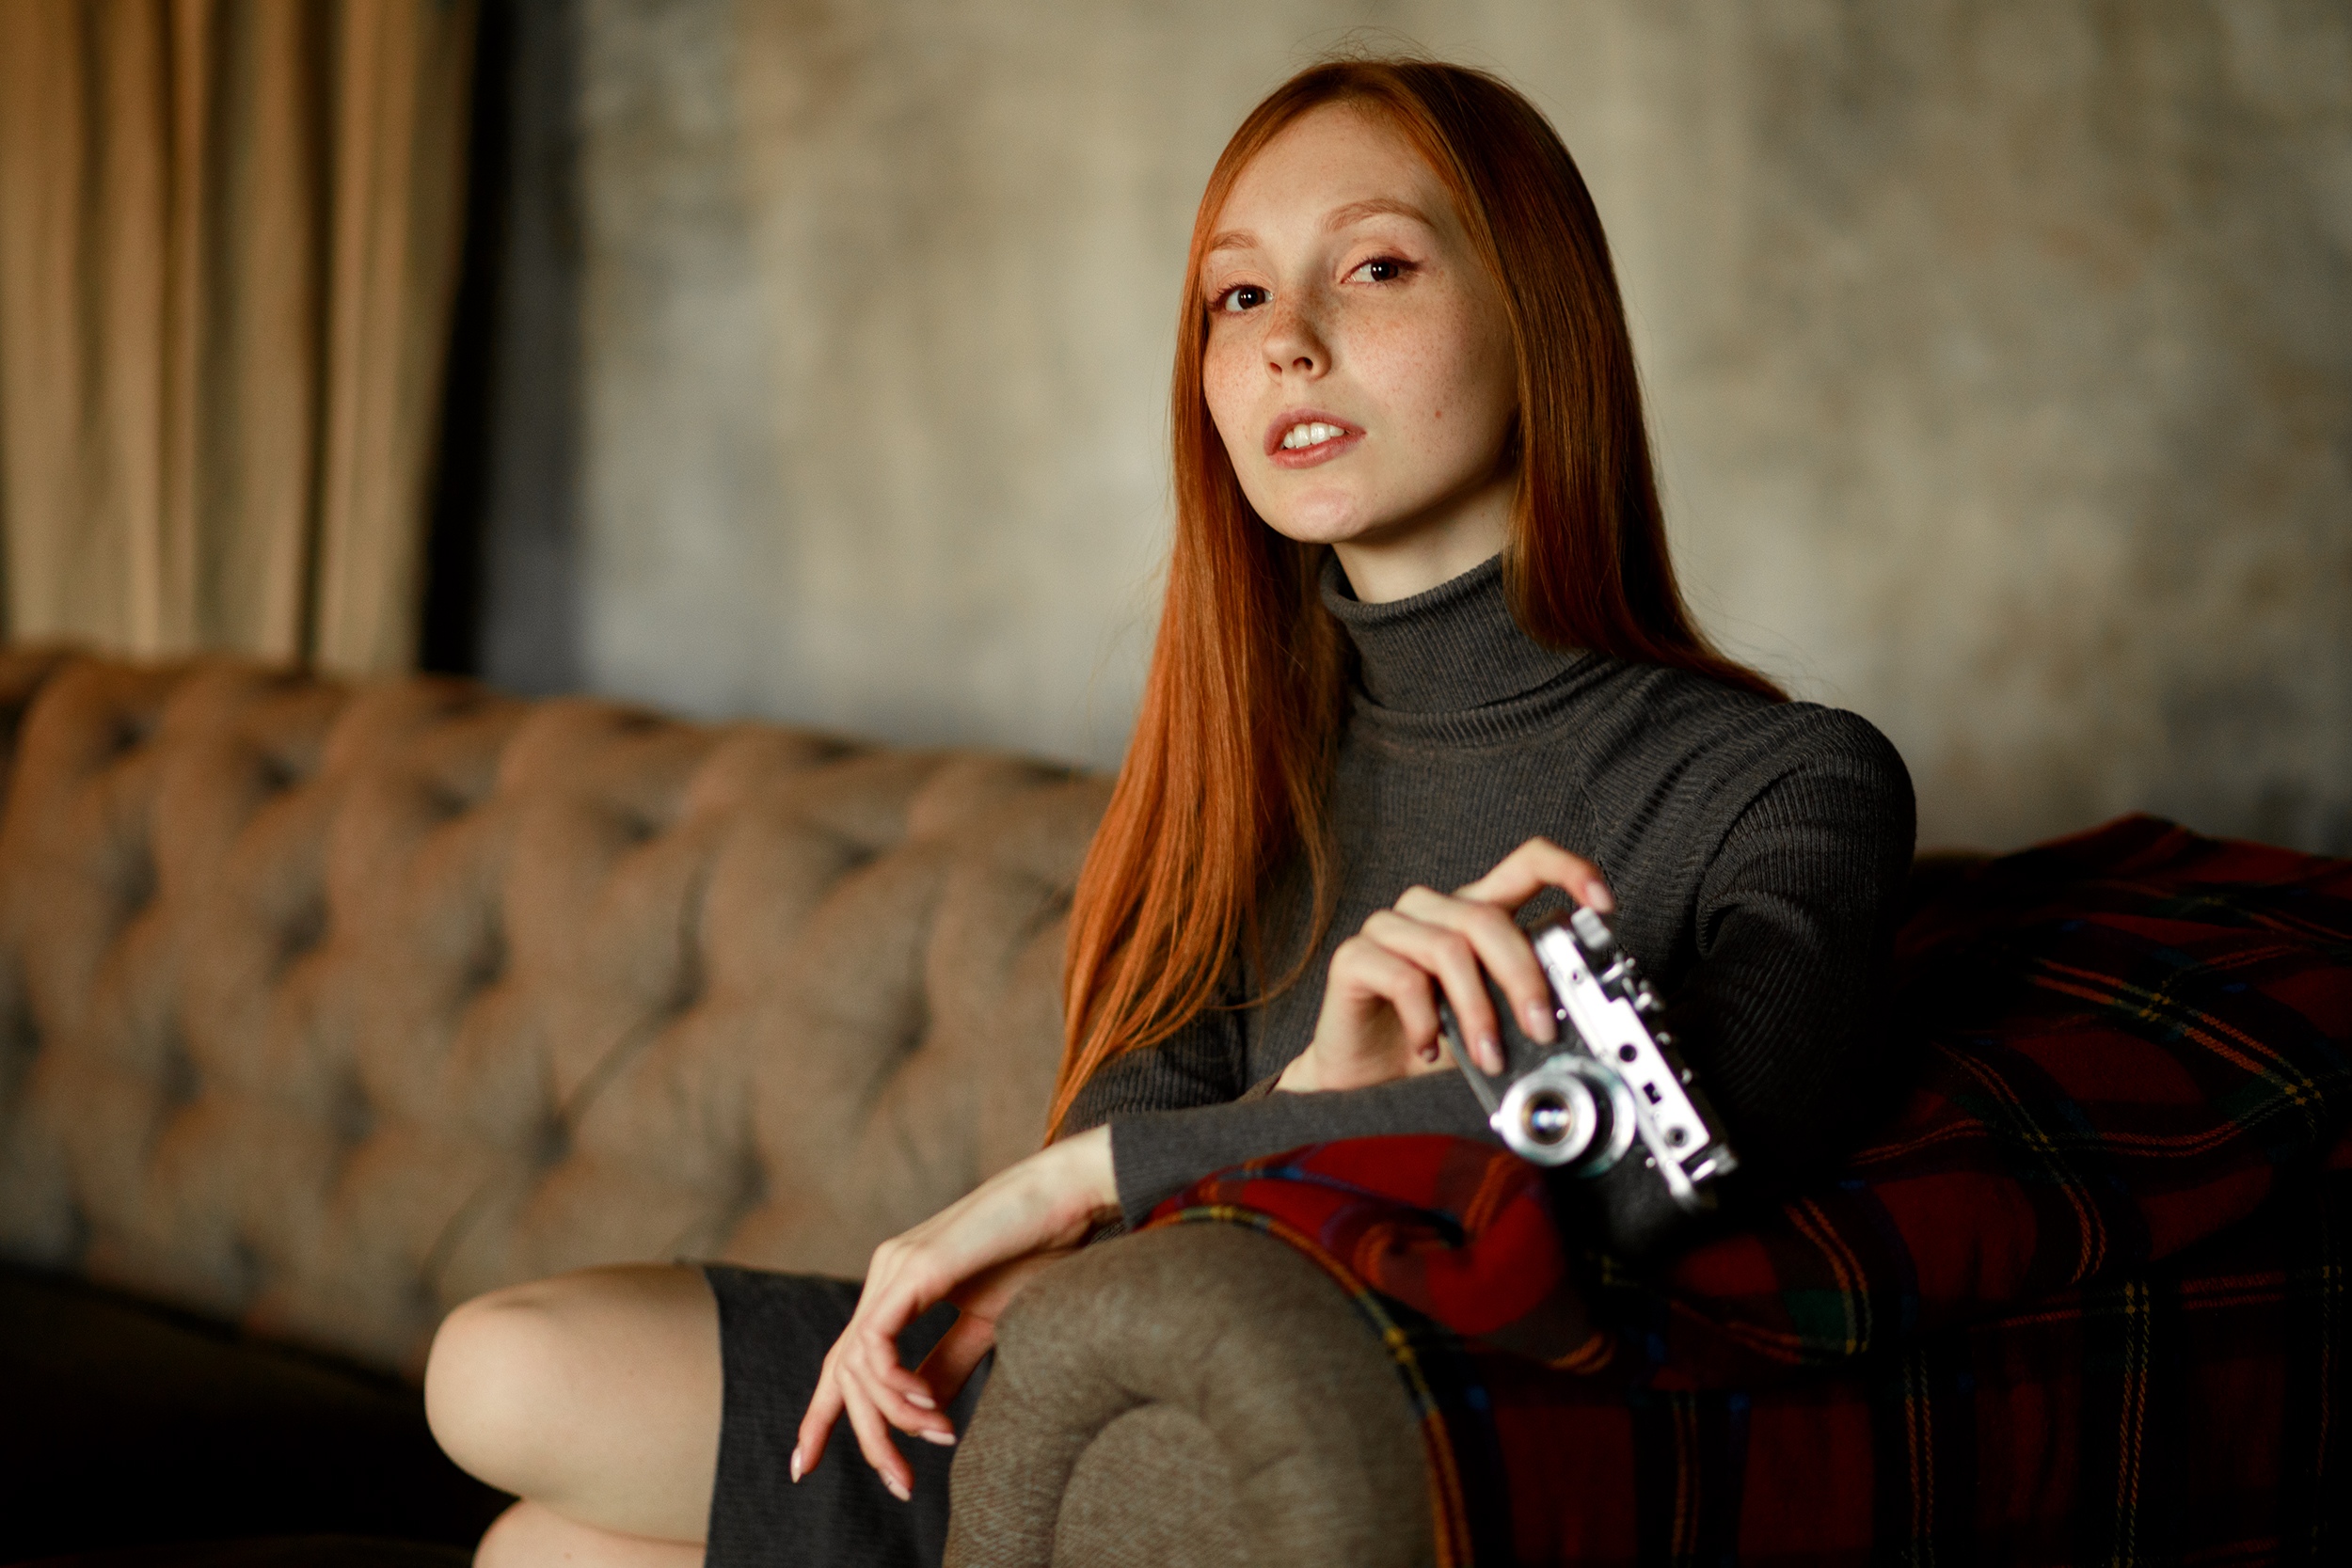 Women Model Redhead Portrait Indoors Looking At Viewer Dress Turtlenecks Camera Couch Depth Of Field 2500x1667